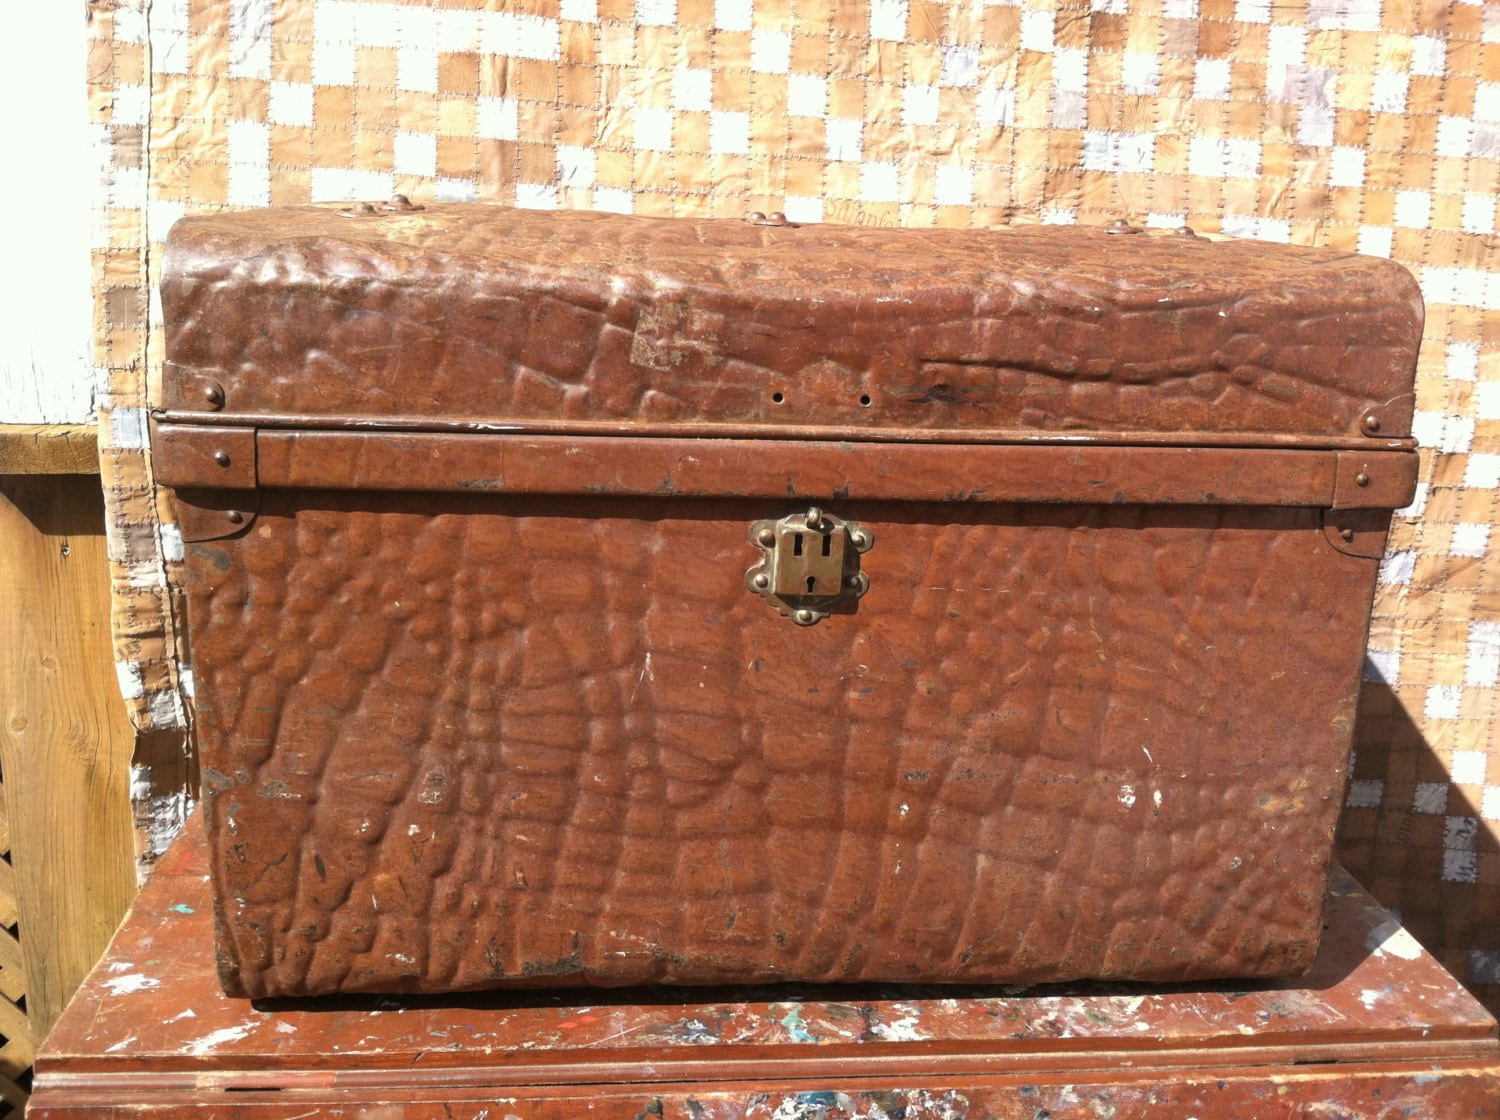 The Trunk in Vintage Tan Croc